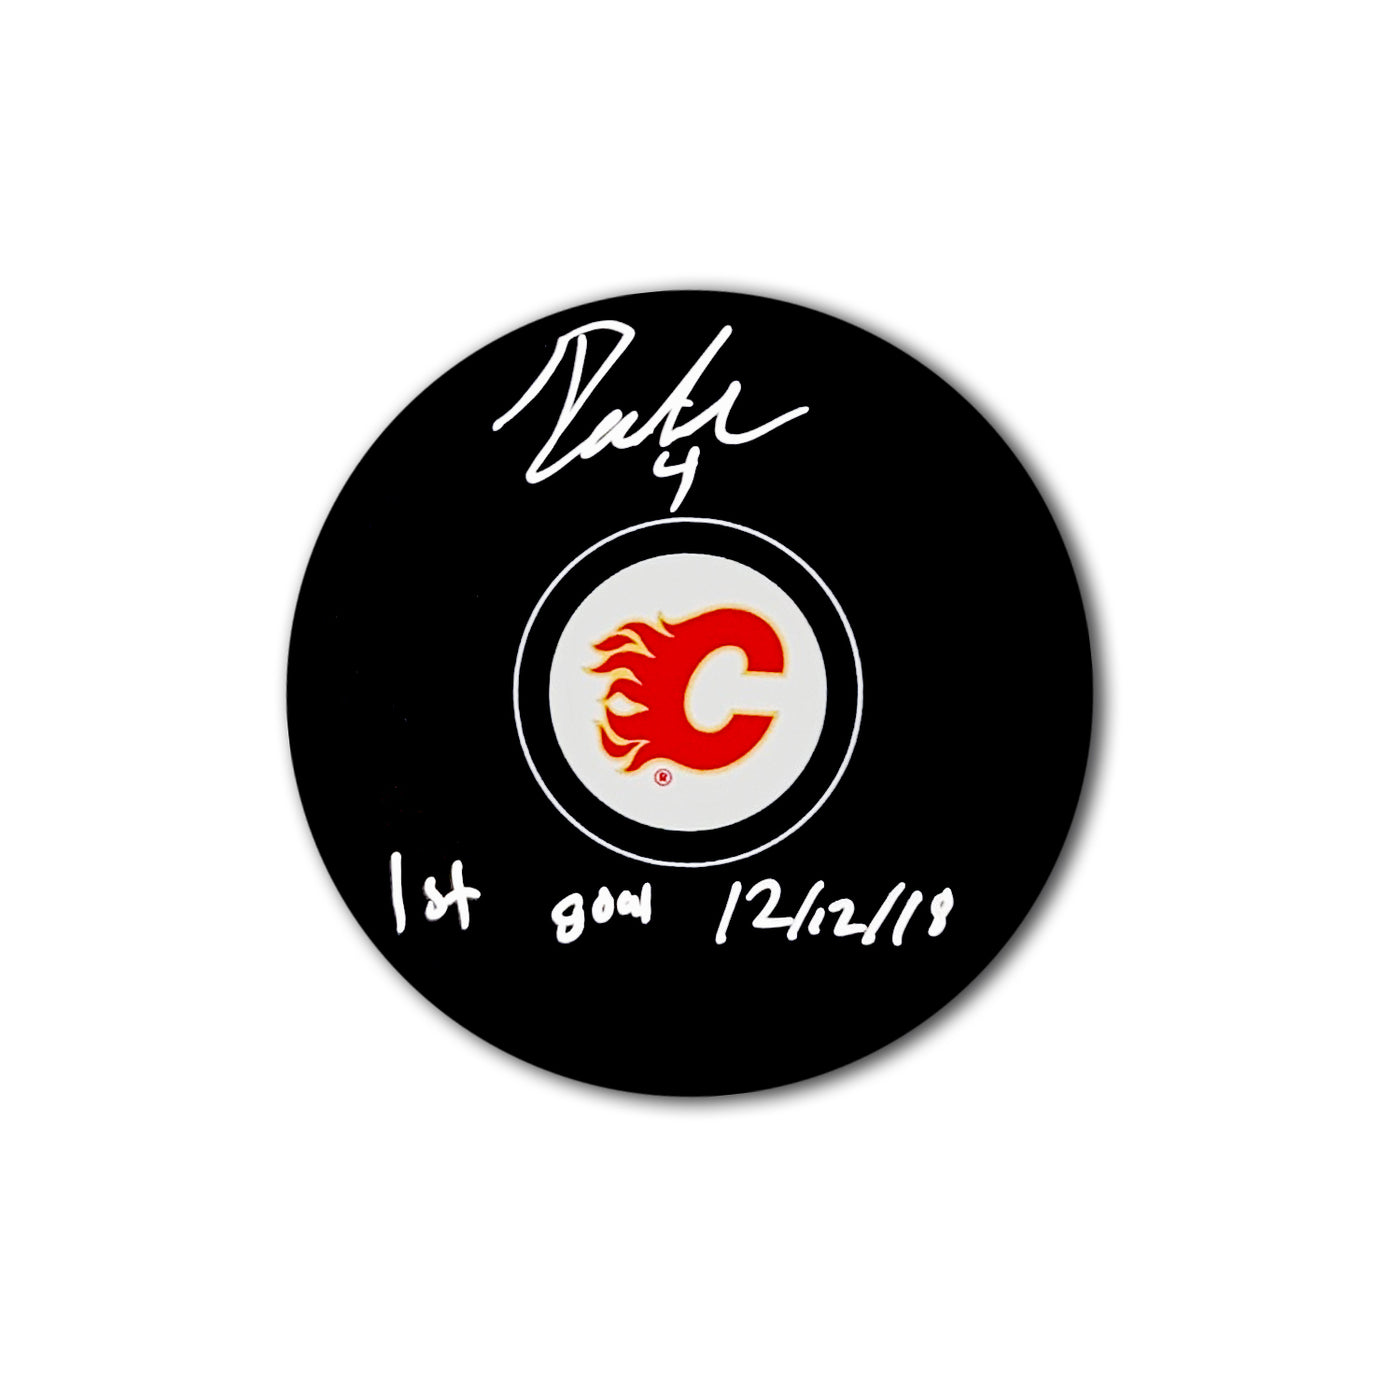 Rasmus Andersson Calgary Flames Autographed Hockey Puck Inscribed 1st Goal 12/12/18